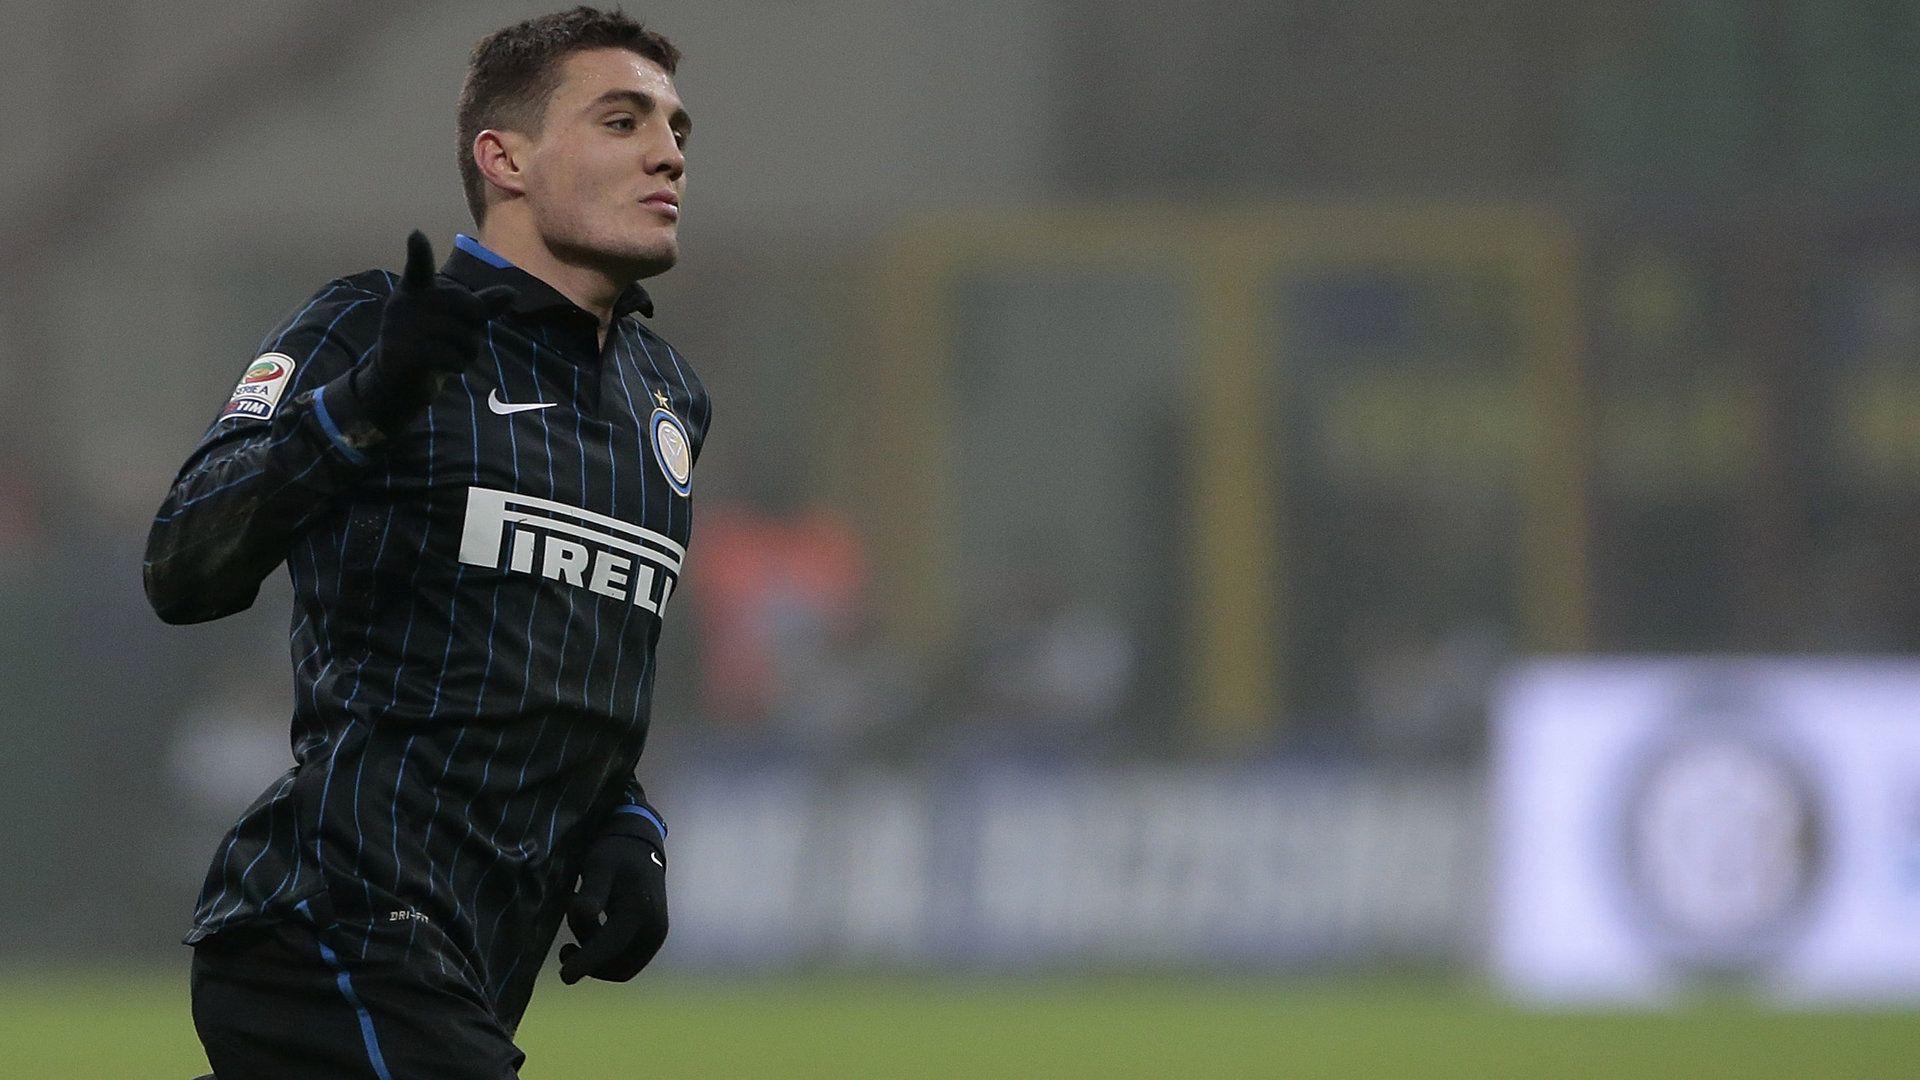 Mateo Kovacic to Real Madrid for 35 million: the two clubs are now